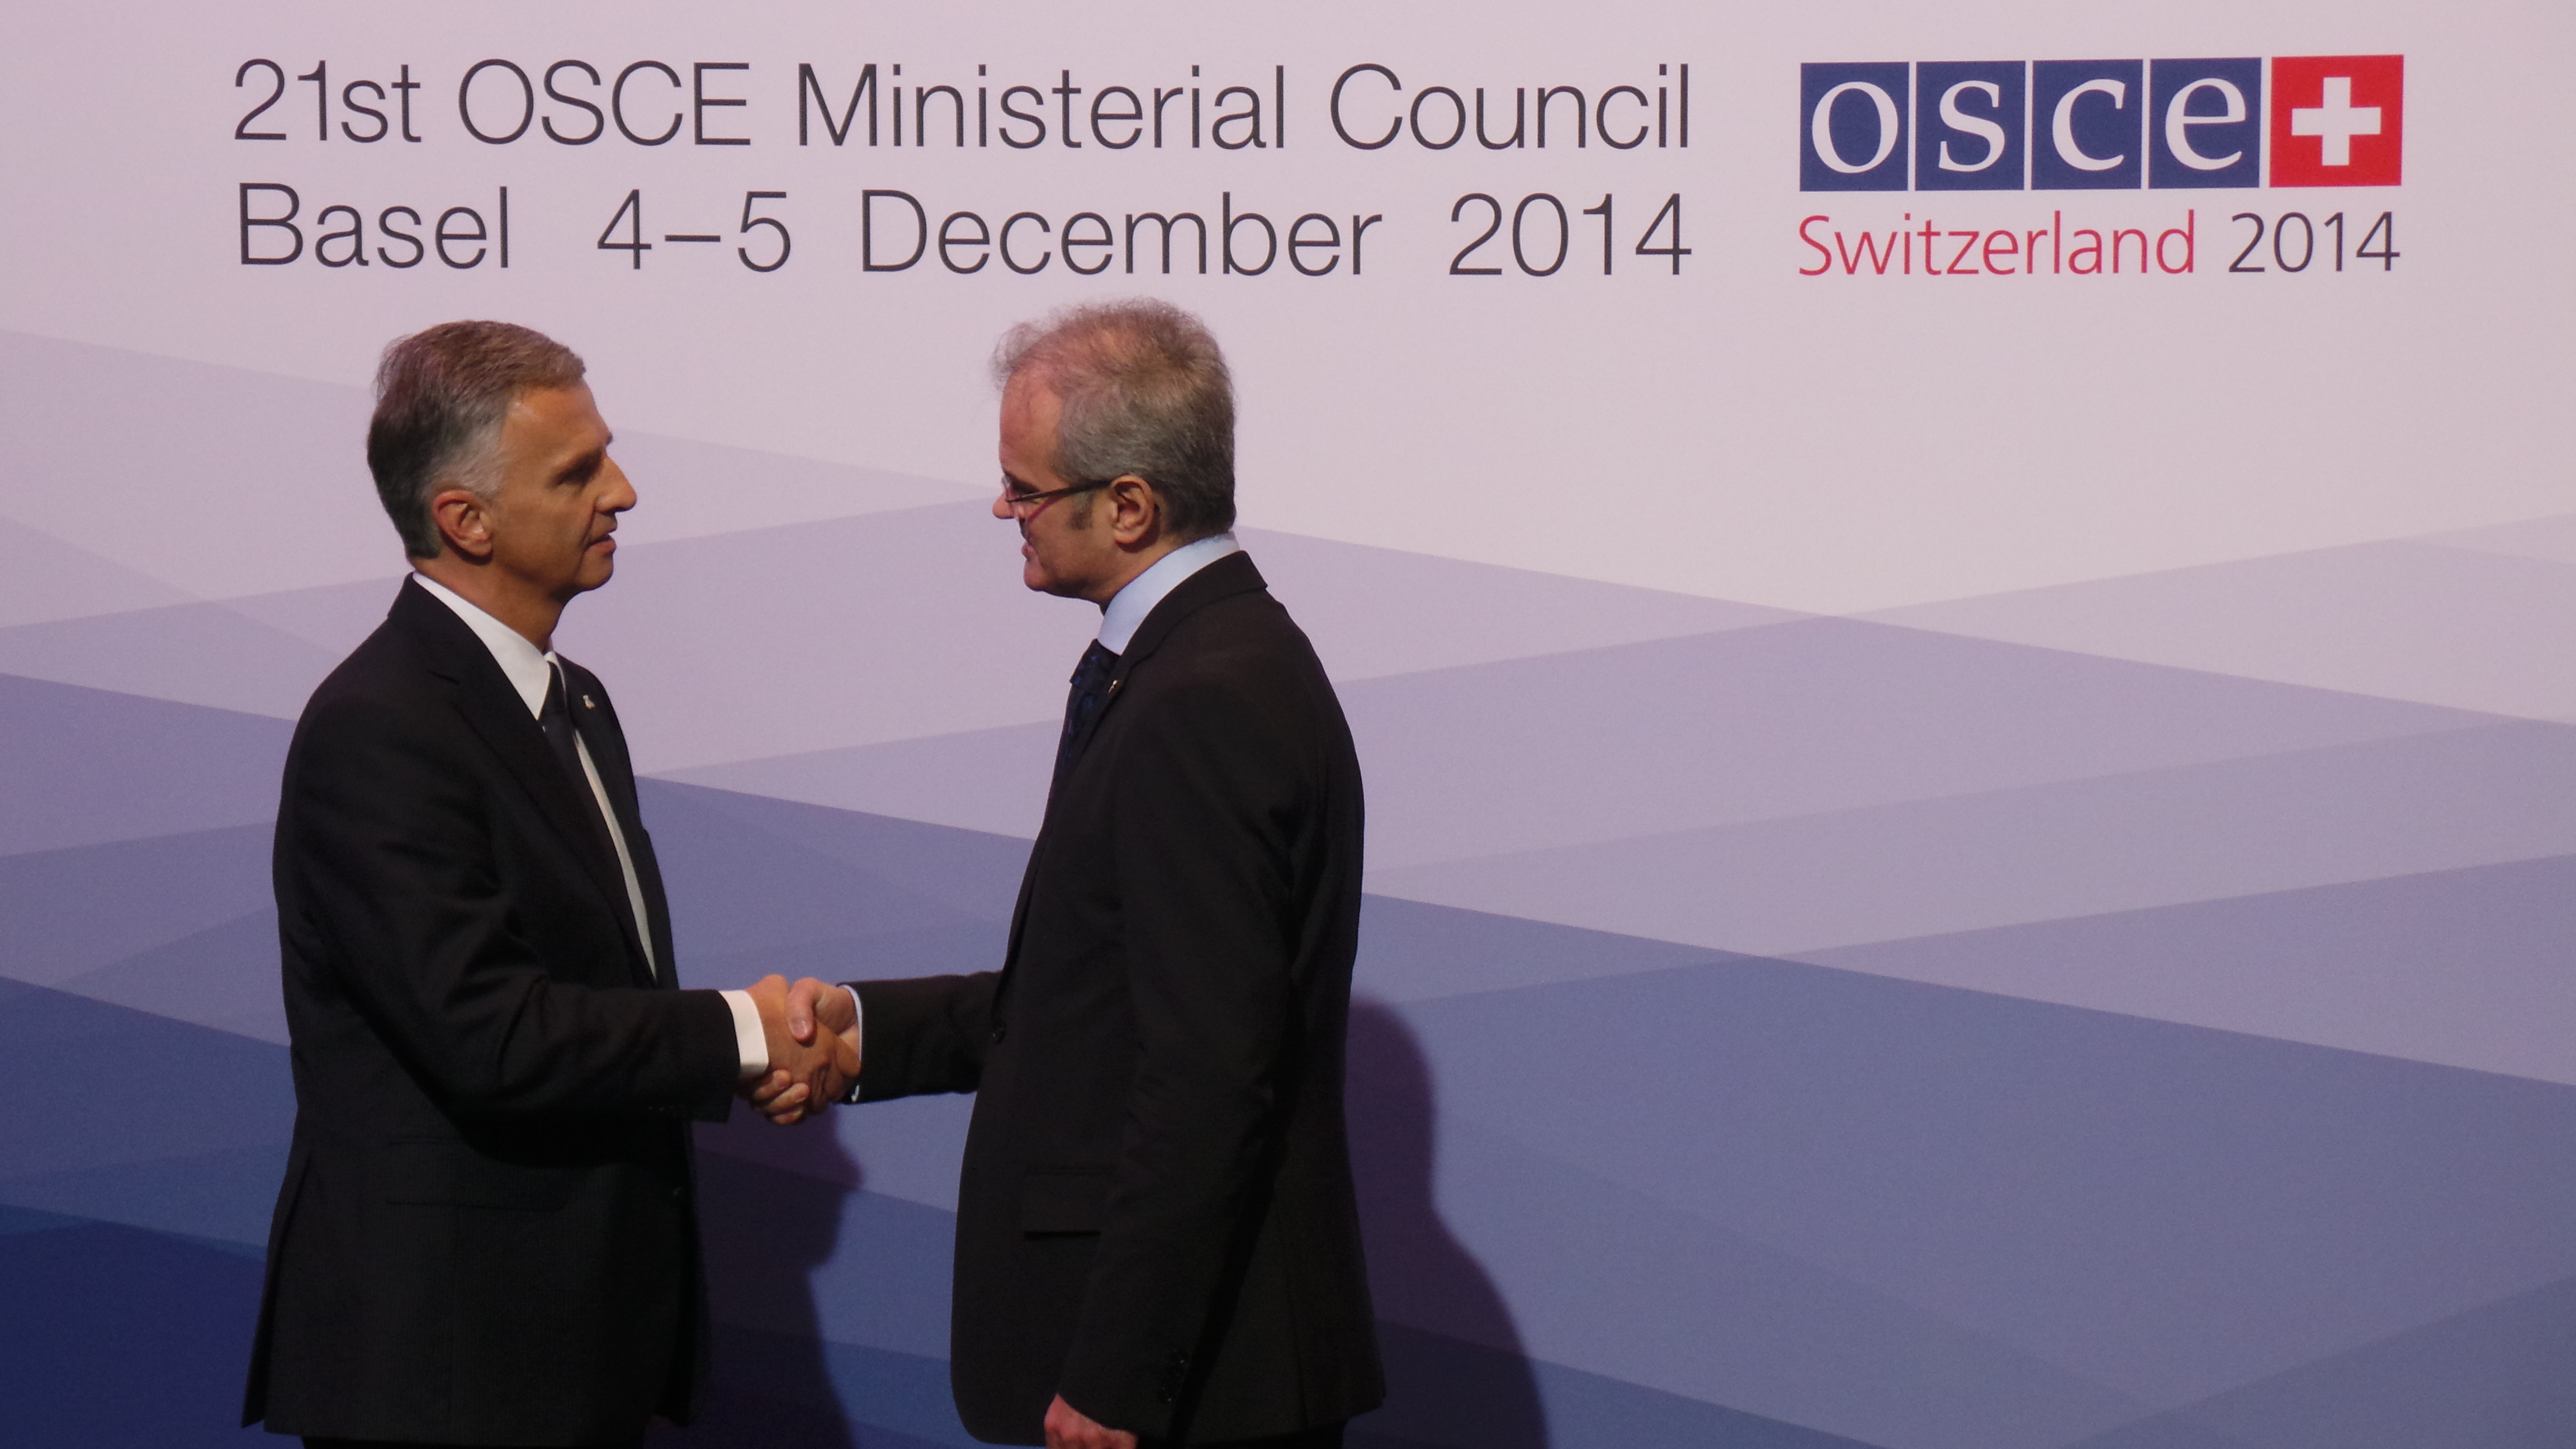 The President of the Swiss Confederation, Didier Burkhalter, greets Calin Stoica, Head of NATO and Multicultural and Political Affairs at the OSCE Ministerial Council 2014 in Basel